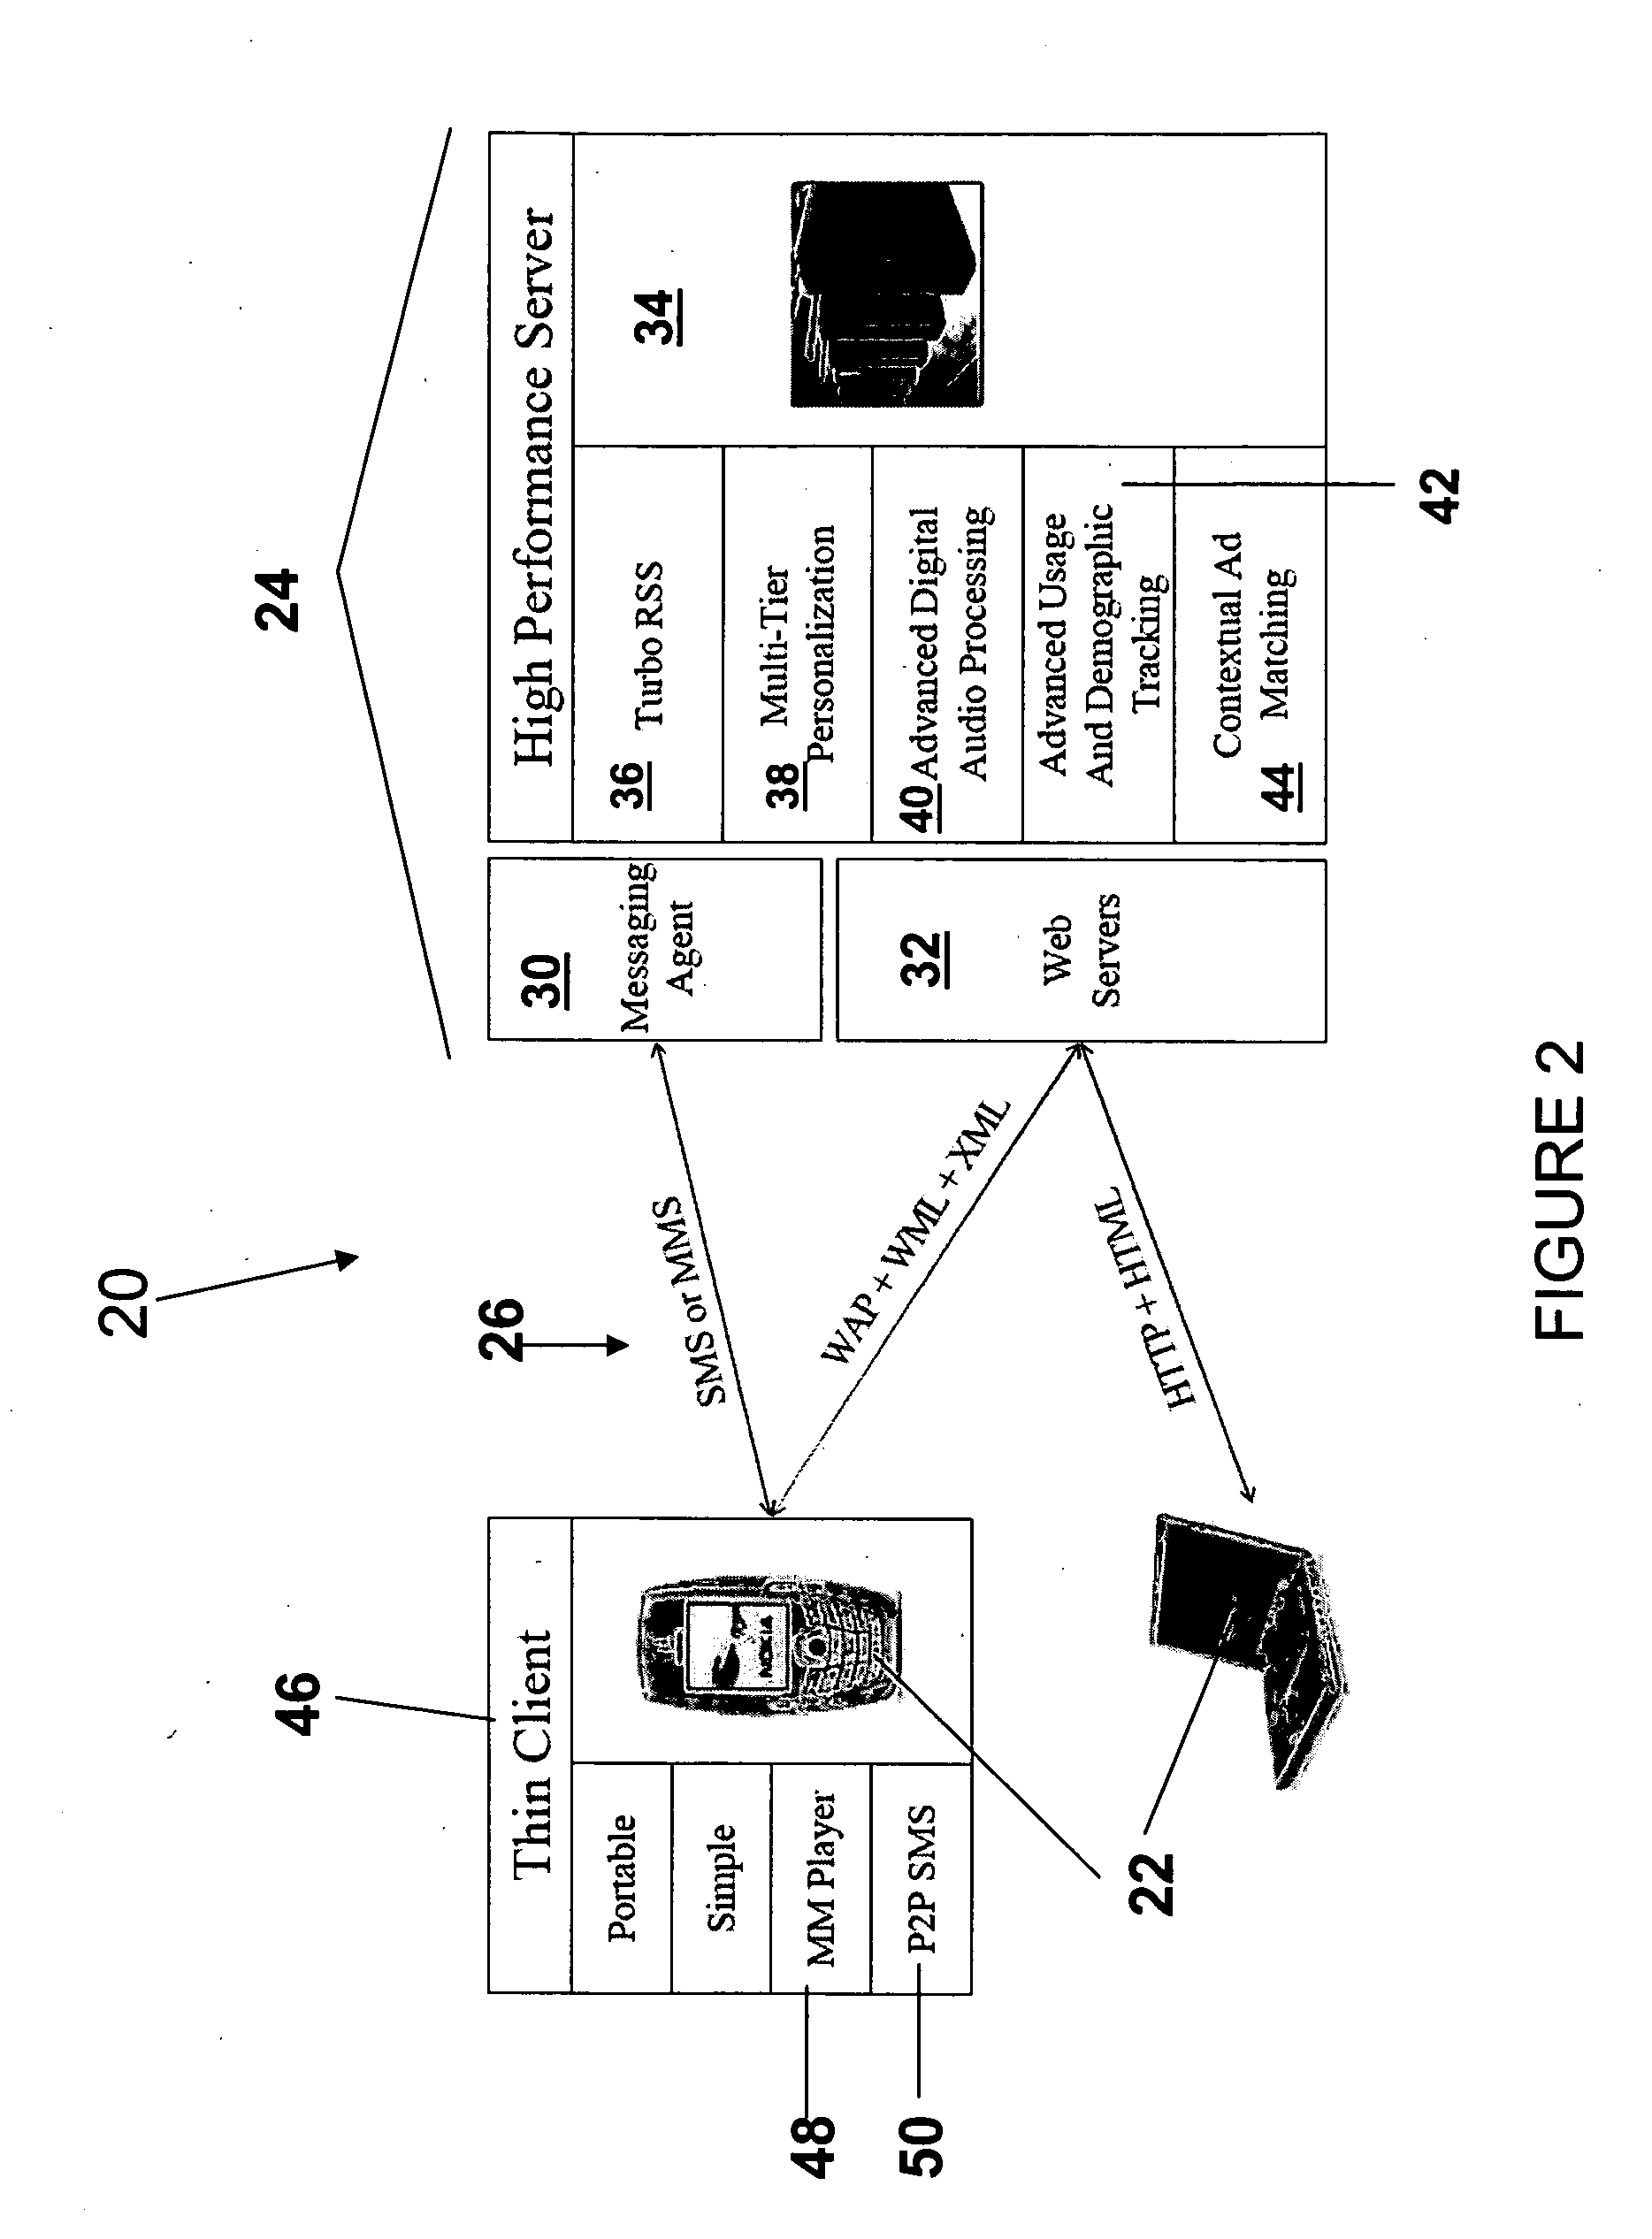 System and method for aggregating, delivering and sharing audio content